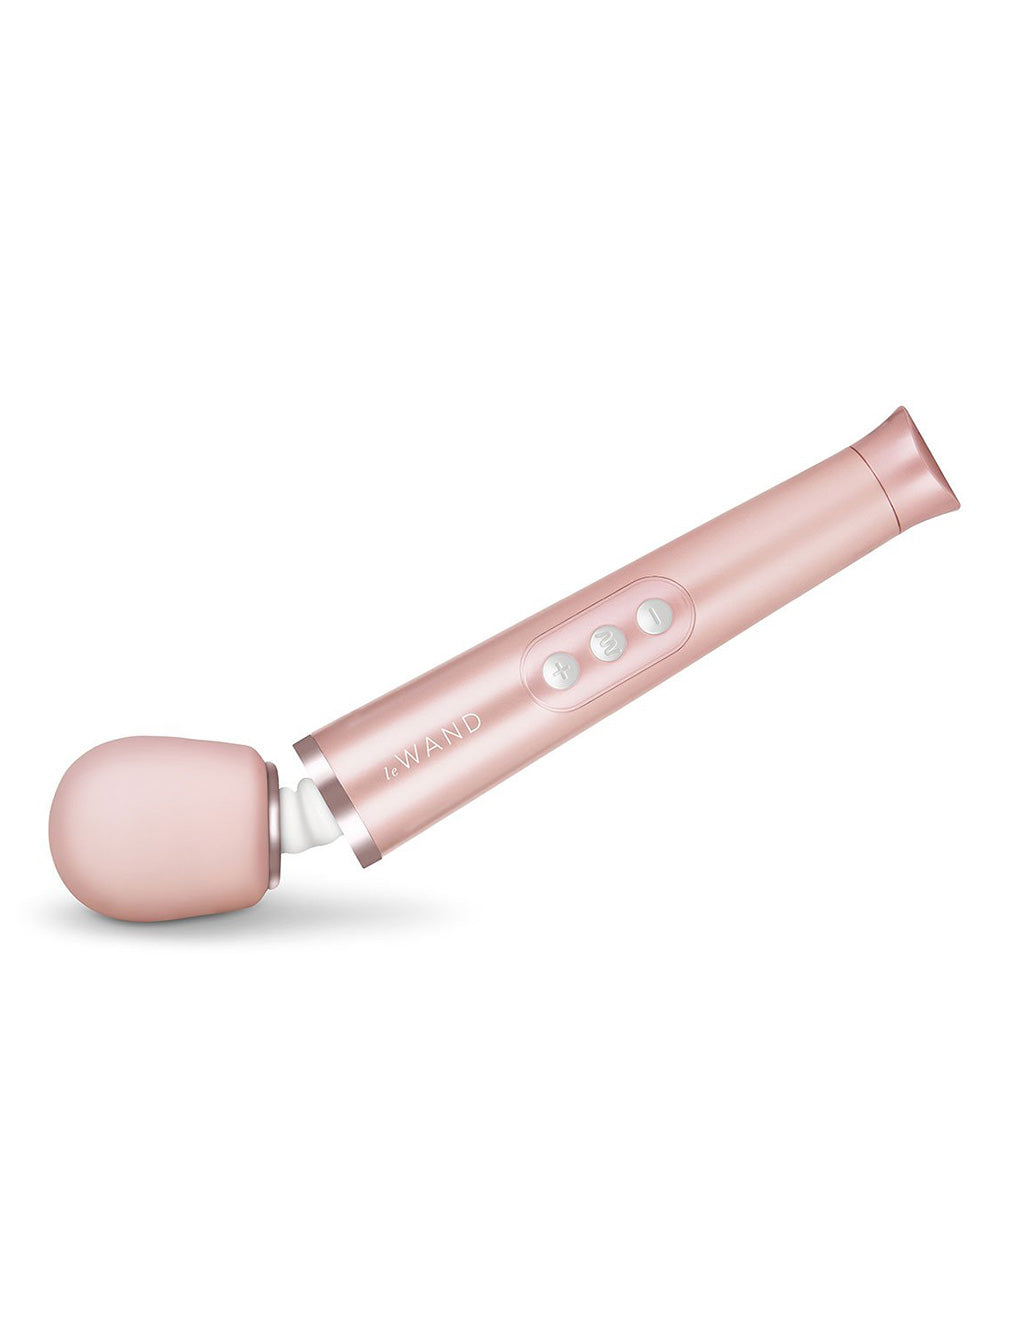 Le Wand Petite Rechargeable Massager Rose Gold Flexing